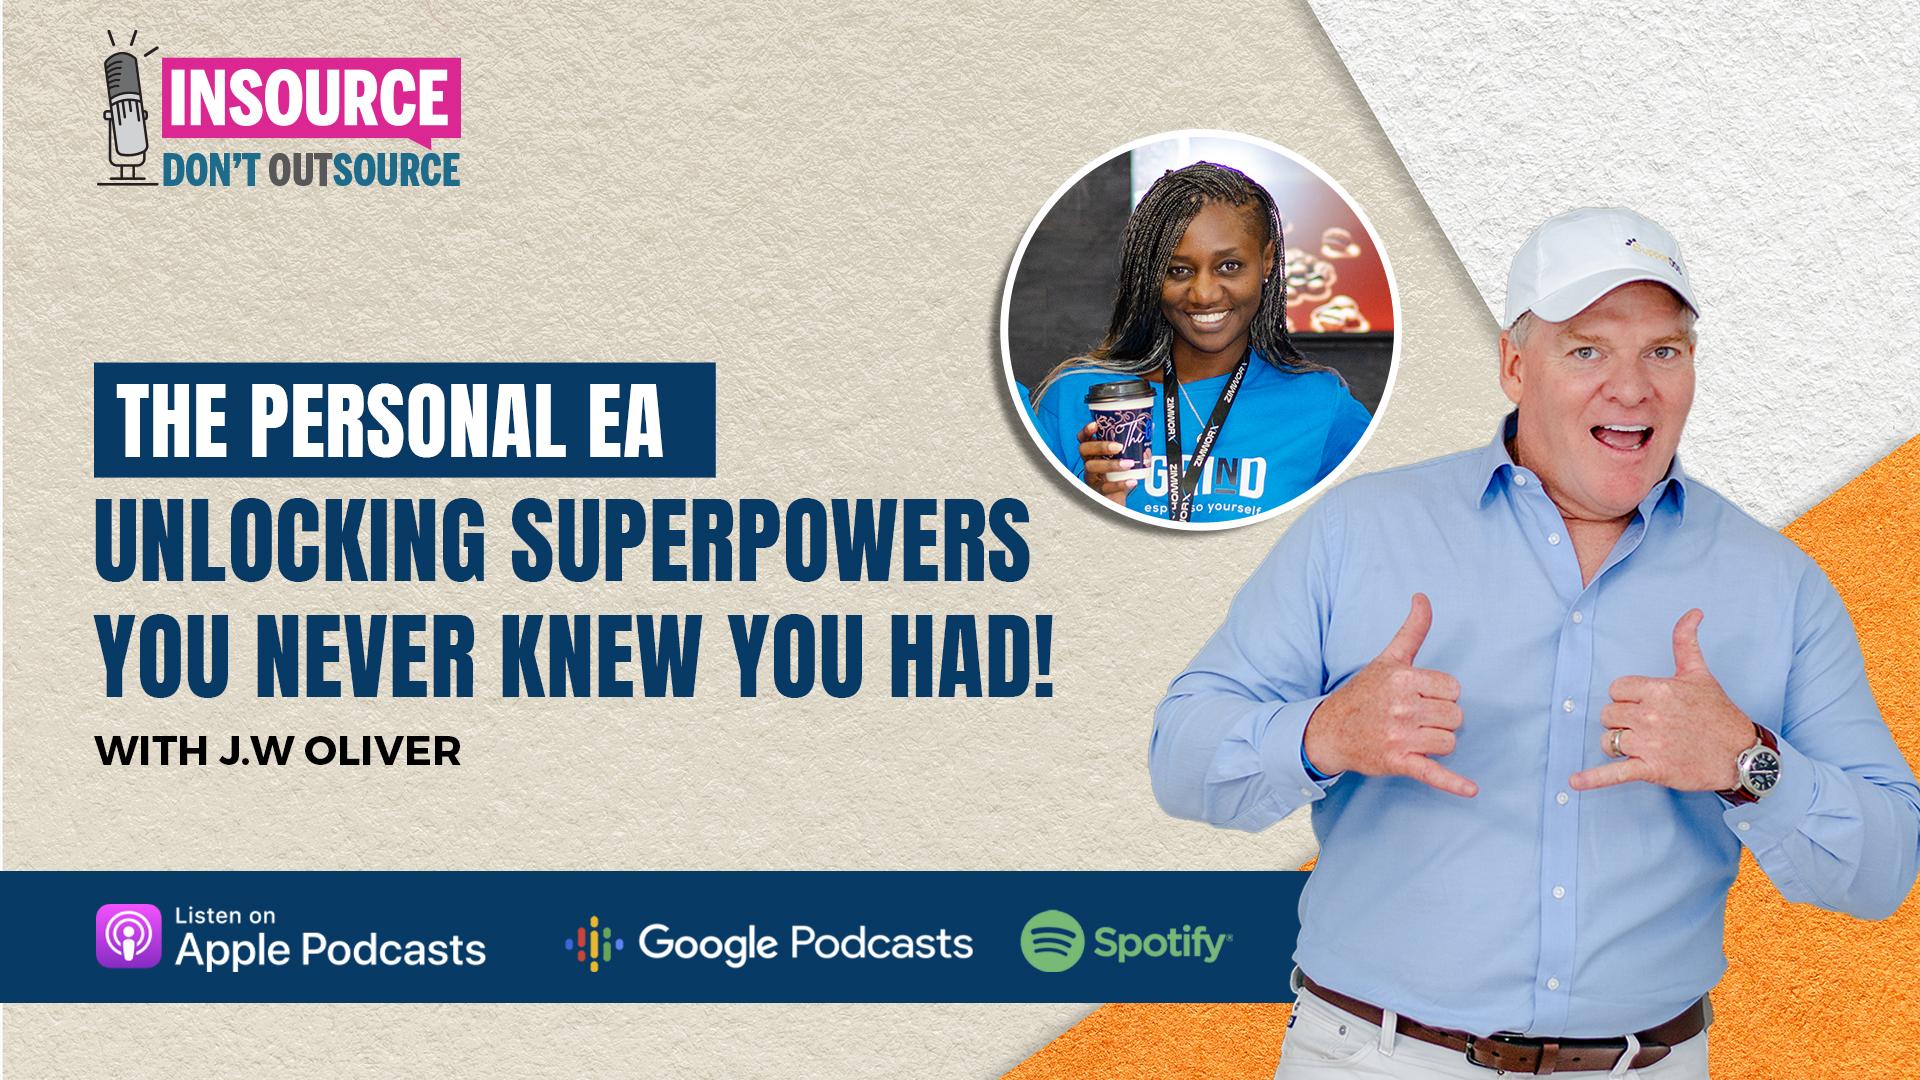 Episode 51 | The EA Series - The Personal EA: Unlocking Superpowers You Never Knew You Had